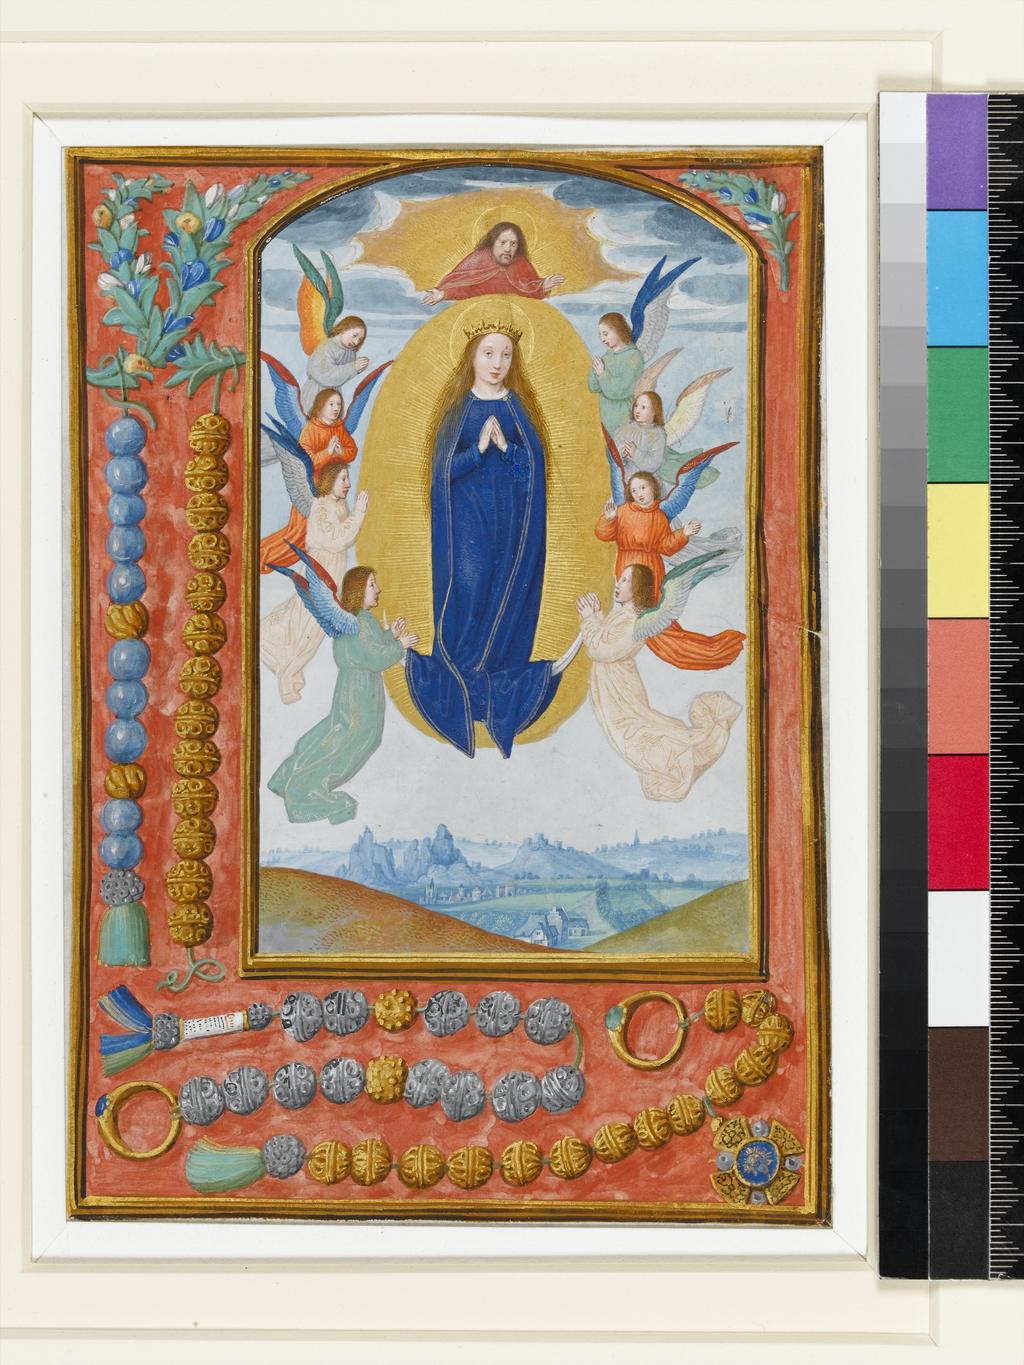 An image of Illuminated Manuscript. Miniature from the Hours of Albrecht of Brandenburg. Prayer for the feast of the Assumption, Assumption of the Virgin, rosaries with rings, jewel and flower branches in border. Simon Bening (Flemish, 1483-1561). Parchment, gold, six leaves with closely trimmed margins, framed illuminated area 175 x 125 mm, no text or ruling on reverse, 1522-1523. Production Place: Bruges, Flanders.